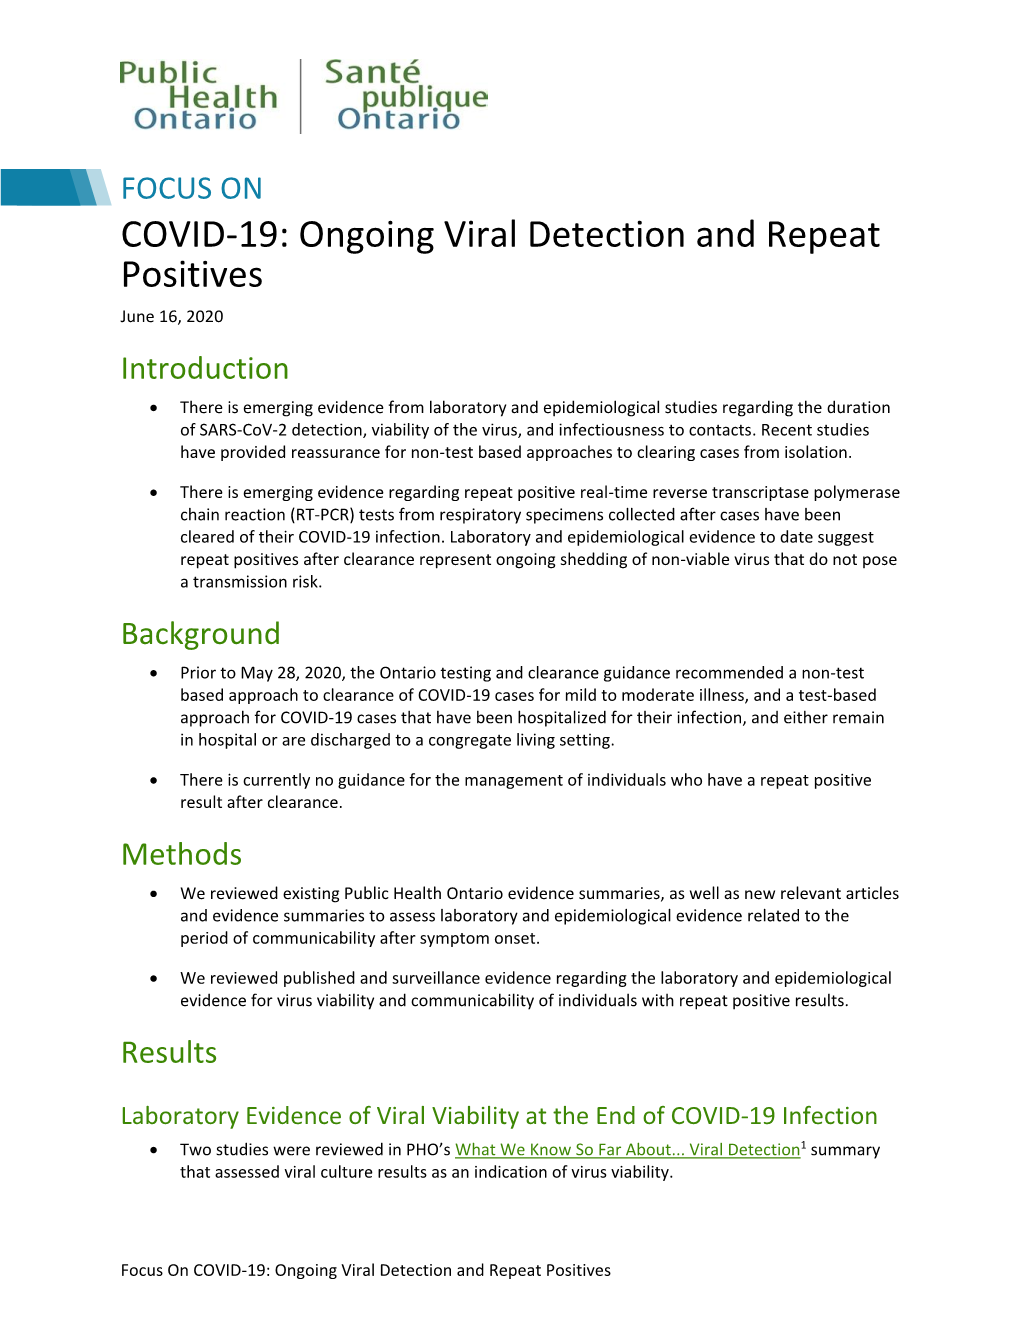 Focus on COVID-19: Ongoing Viral Detection and Repeat Positives